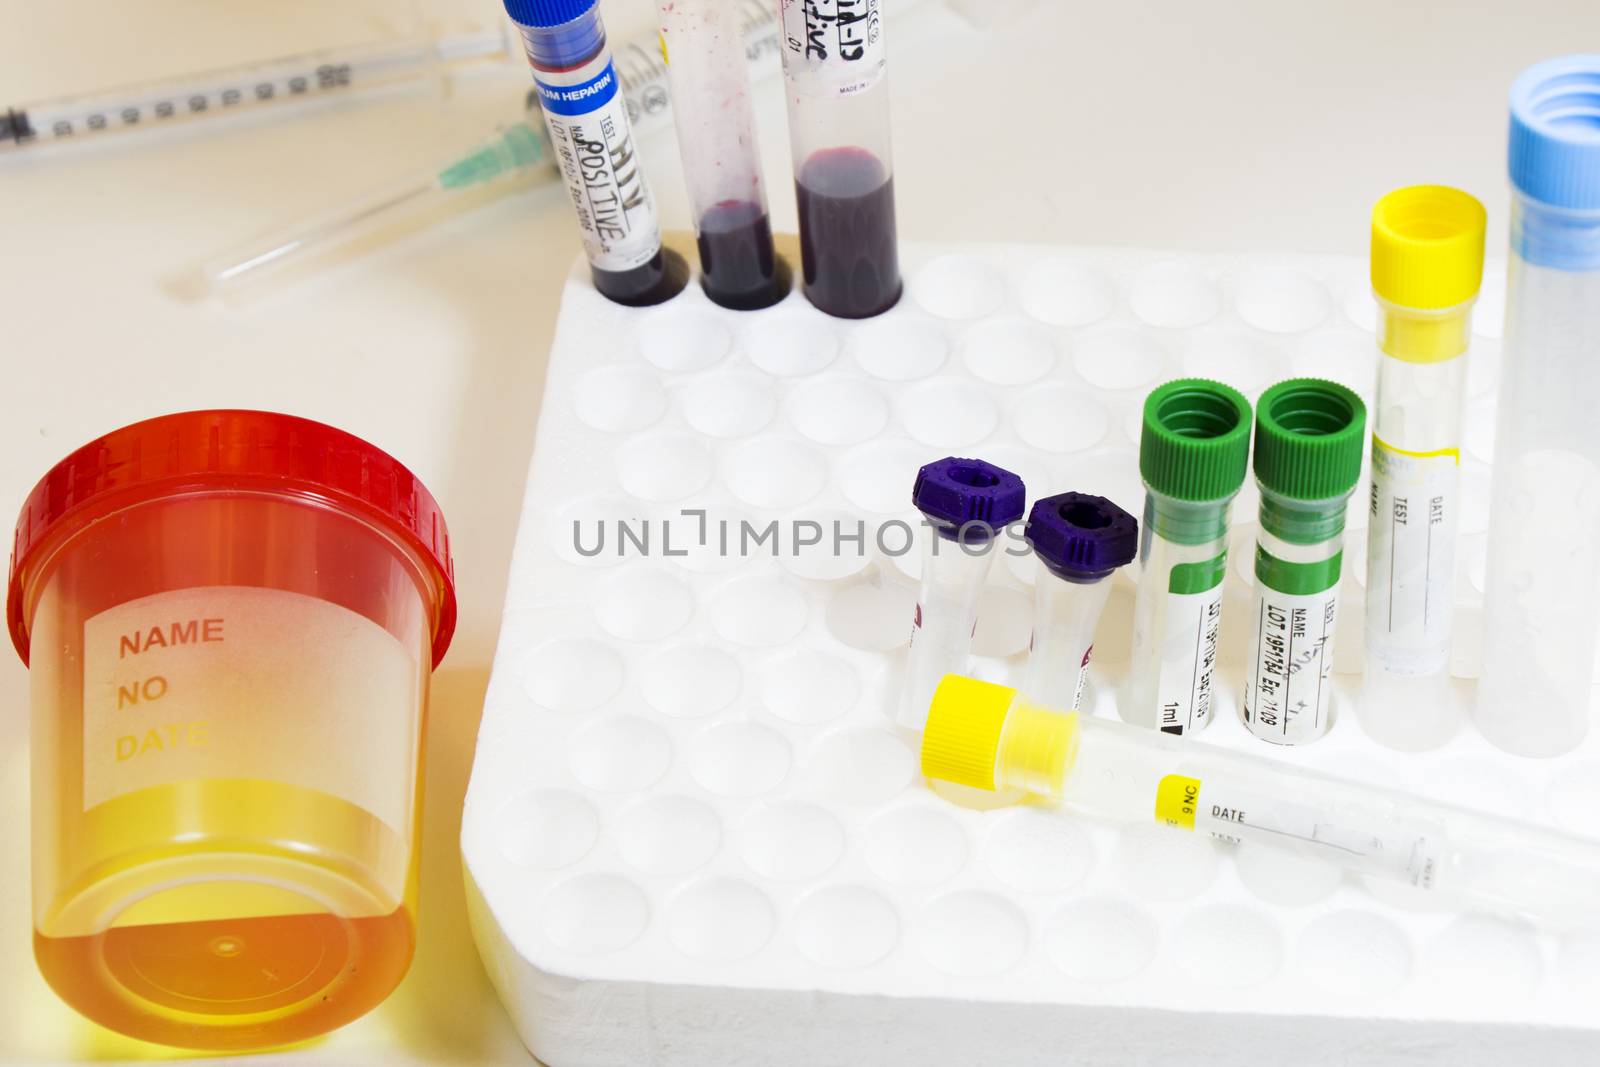 Drug test, medical urine and pee test with blood and other tubes on the white background, colorful lab test containers by Taidundua